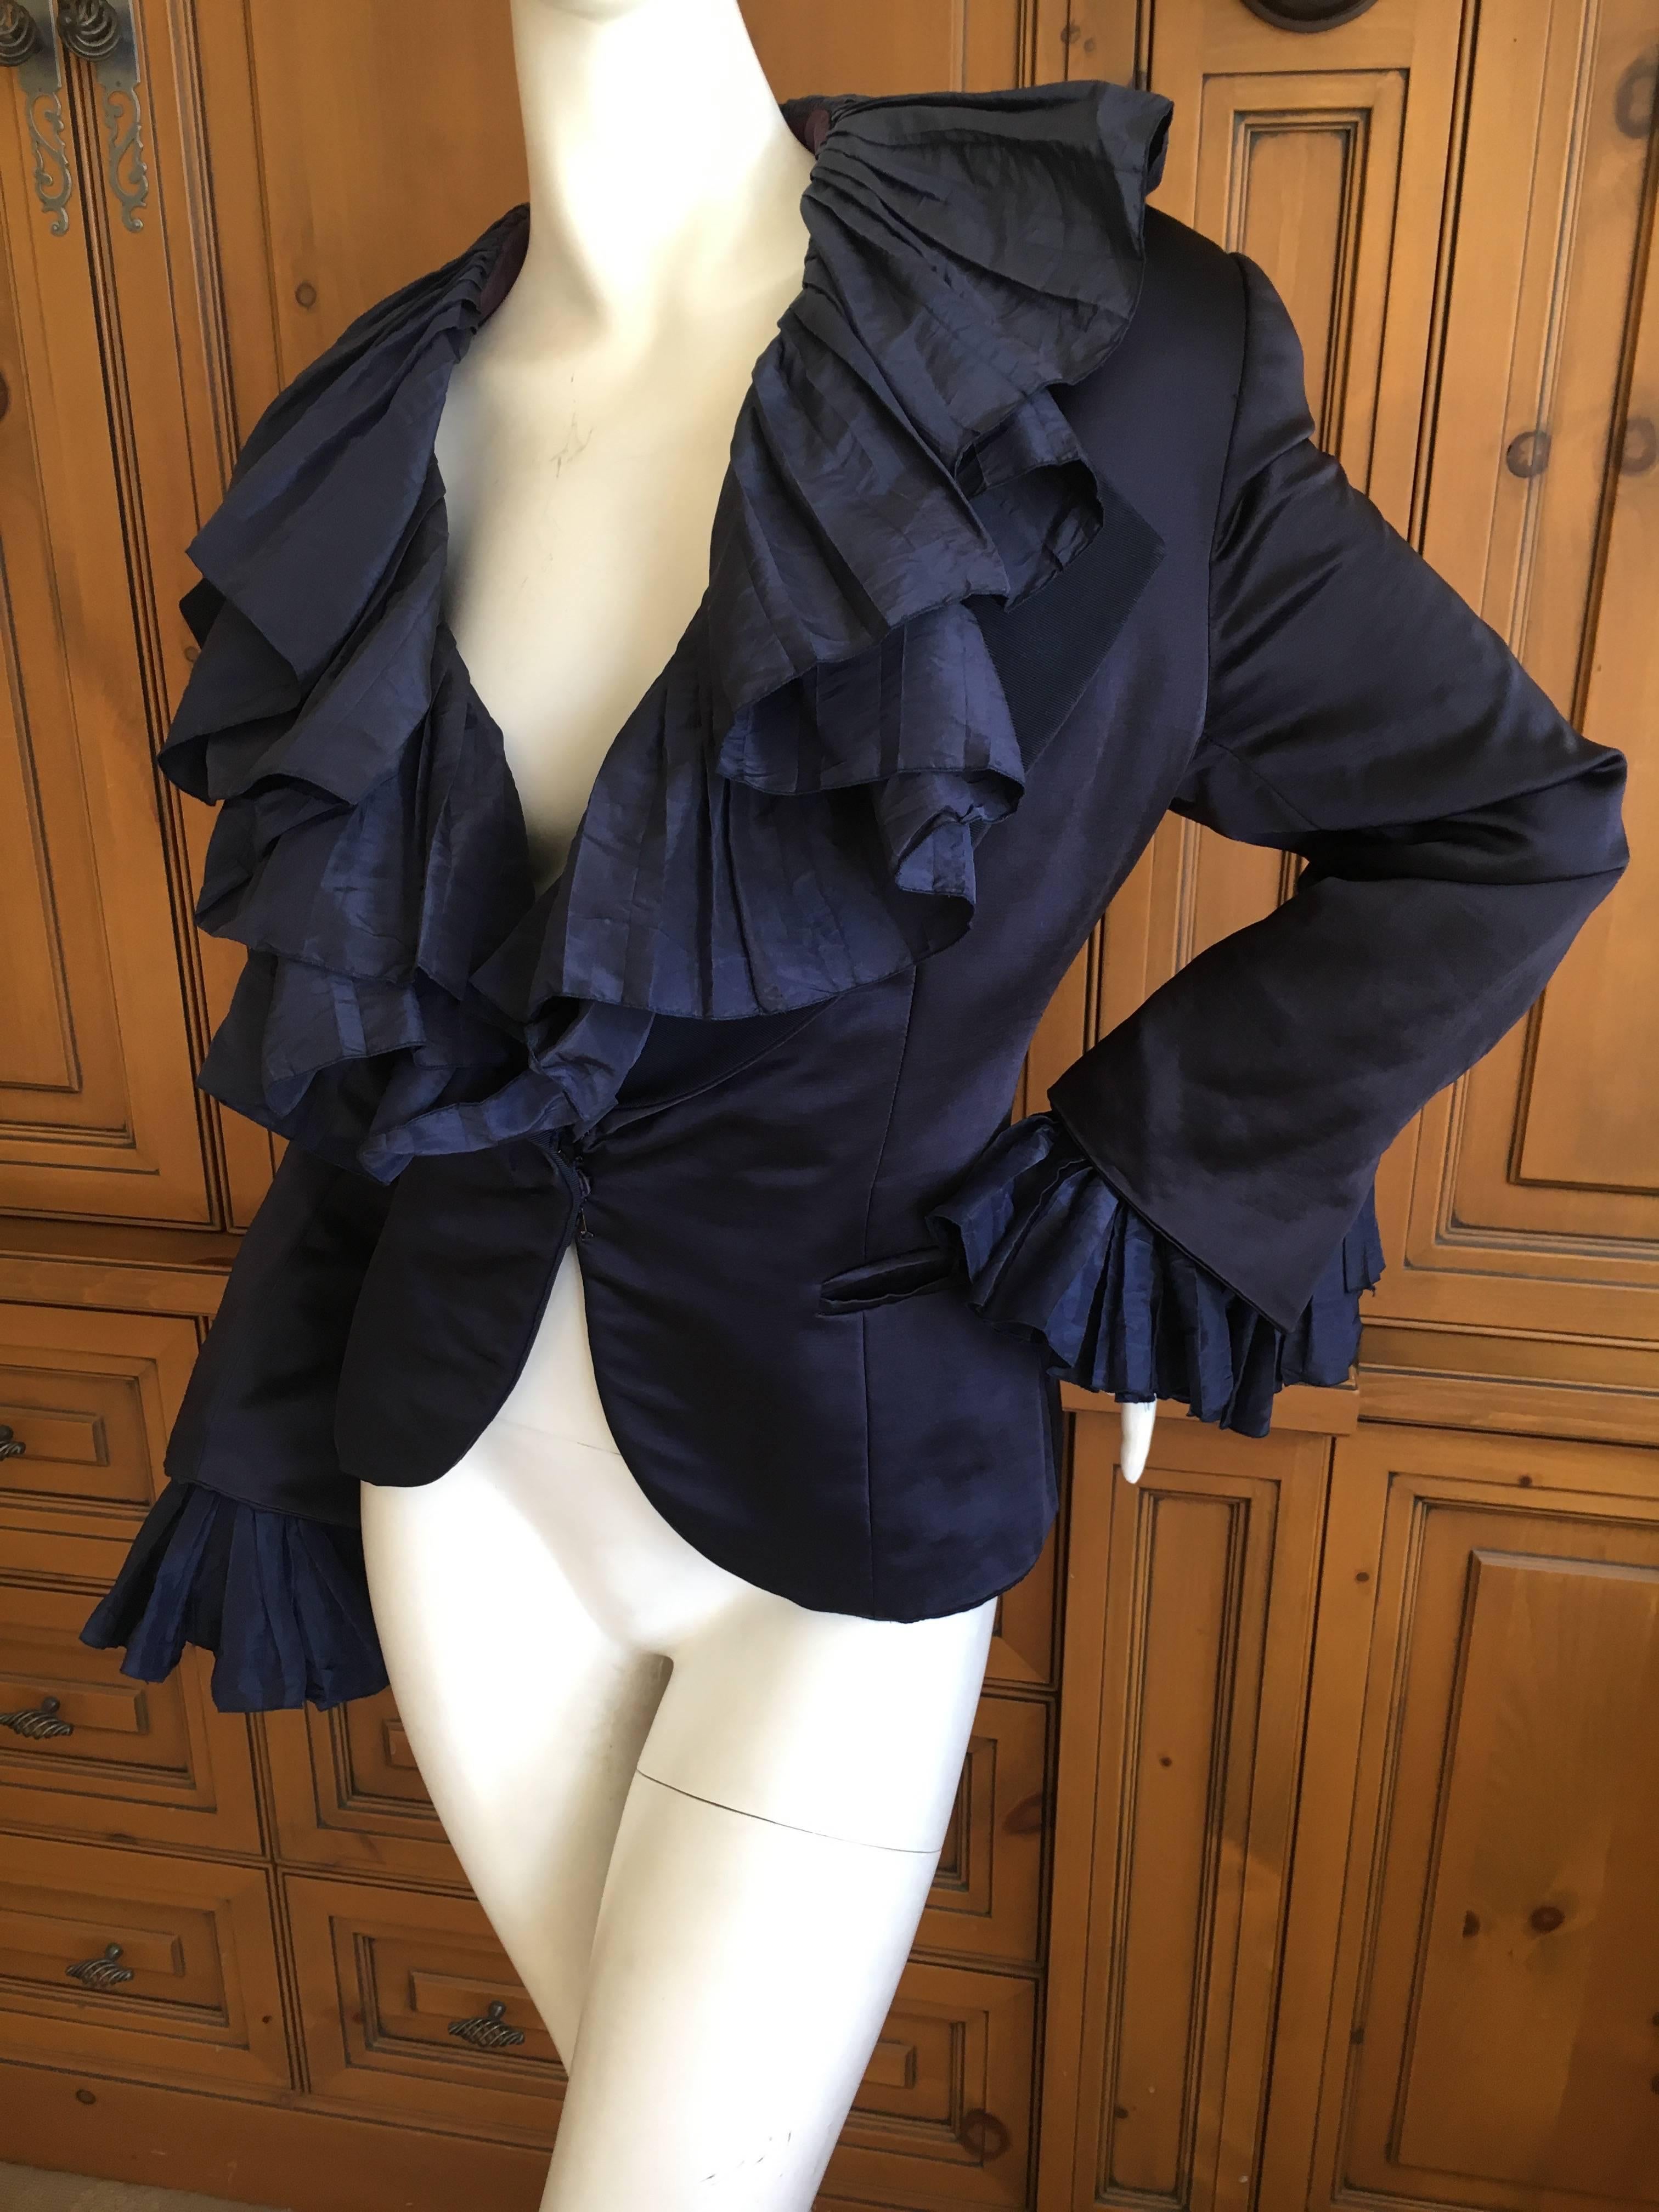 Christian Dior Numbered Demi Couture Ruffled Silk Jacket by Gianfranco Ferre XL In Good Condition For Sale In Cloverdale, CA